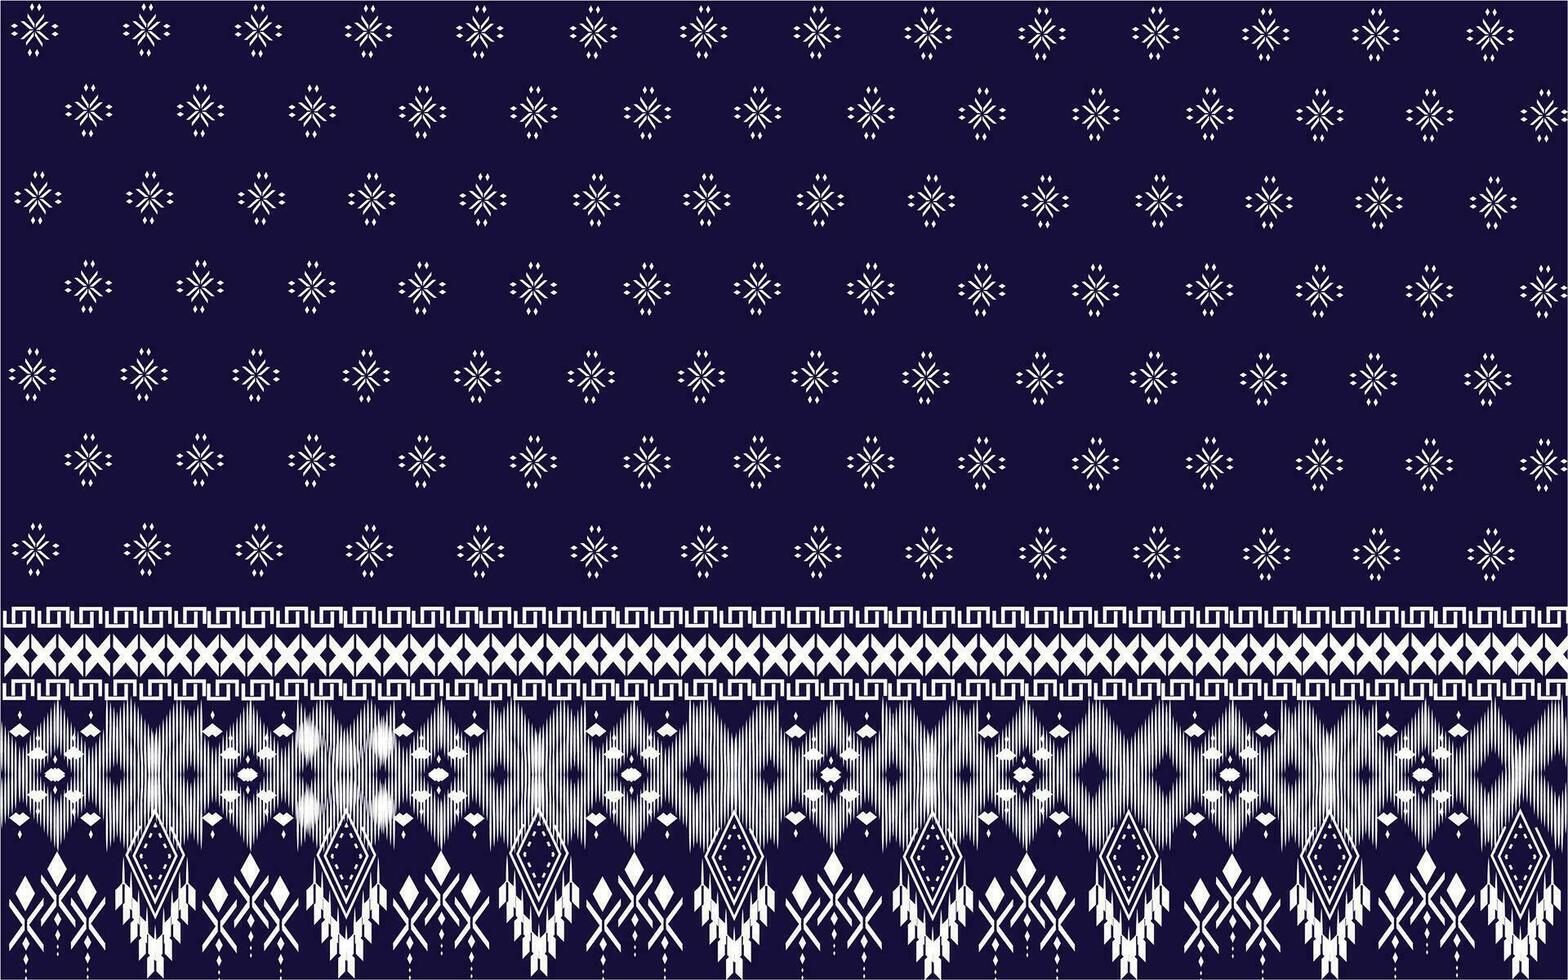 Ethnic geometric pattern, traditional design pattern used for skirt, wallpaper, clothing, fabric,texture,textile, clothing, fashion, embroidery, seamless pattern. vector illustration.